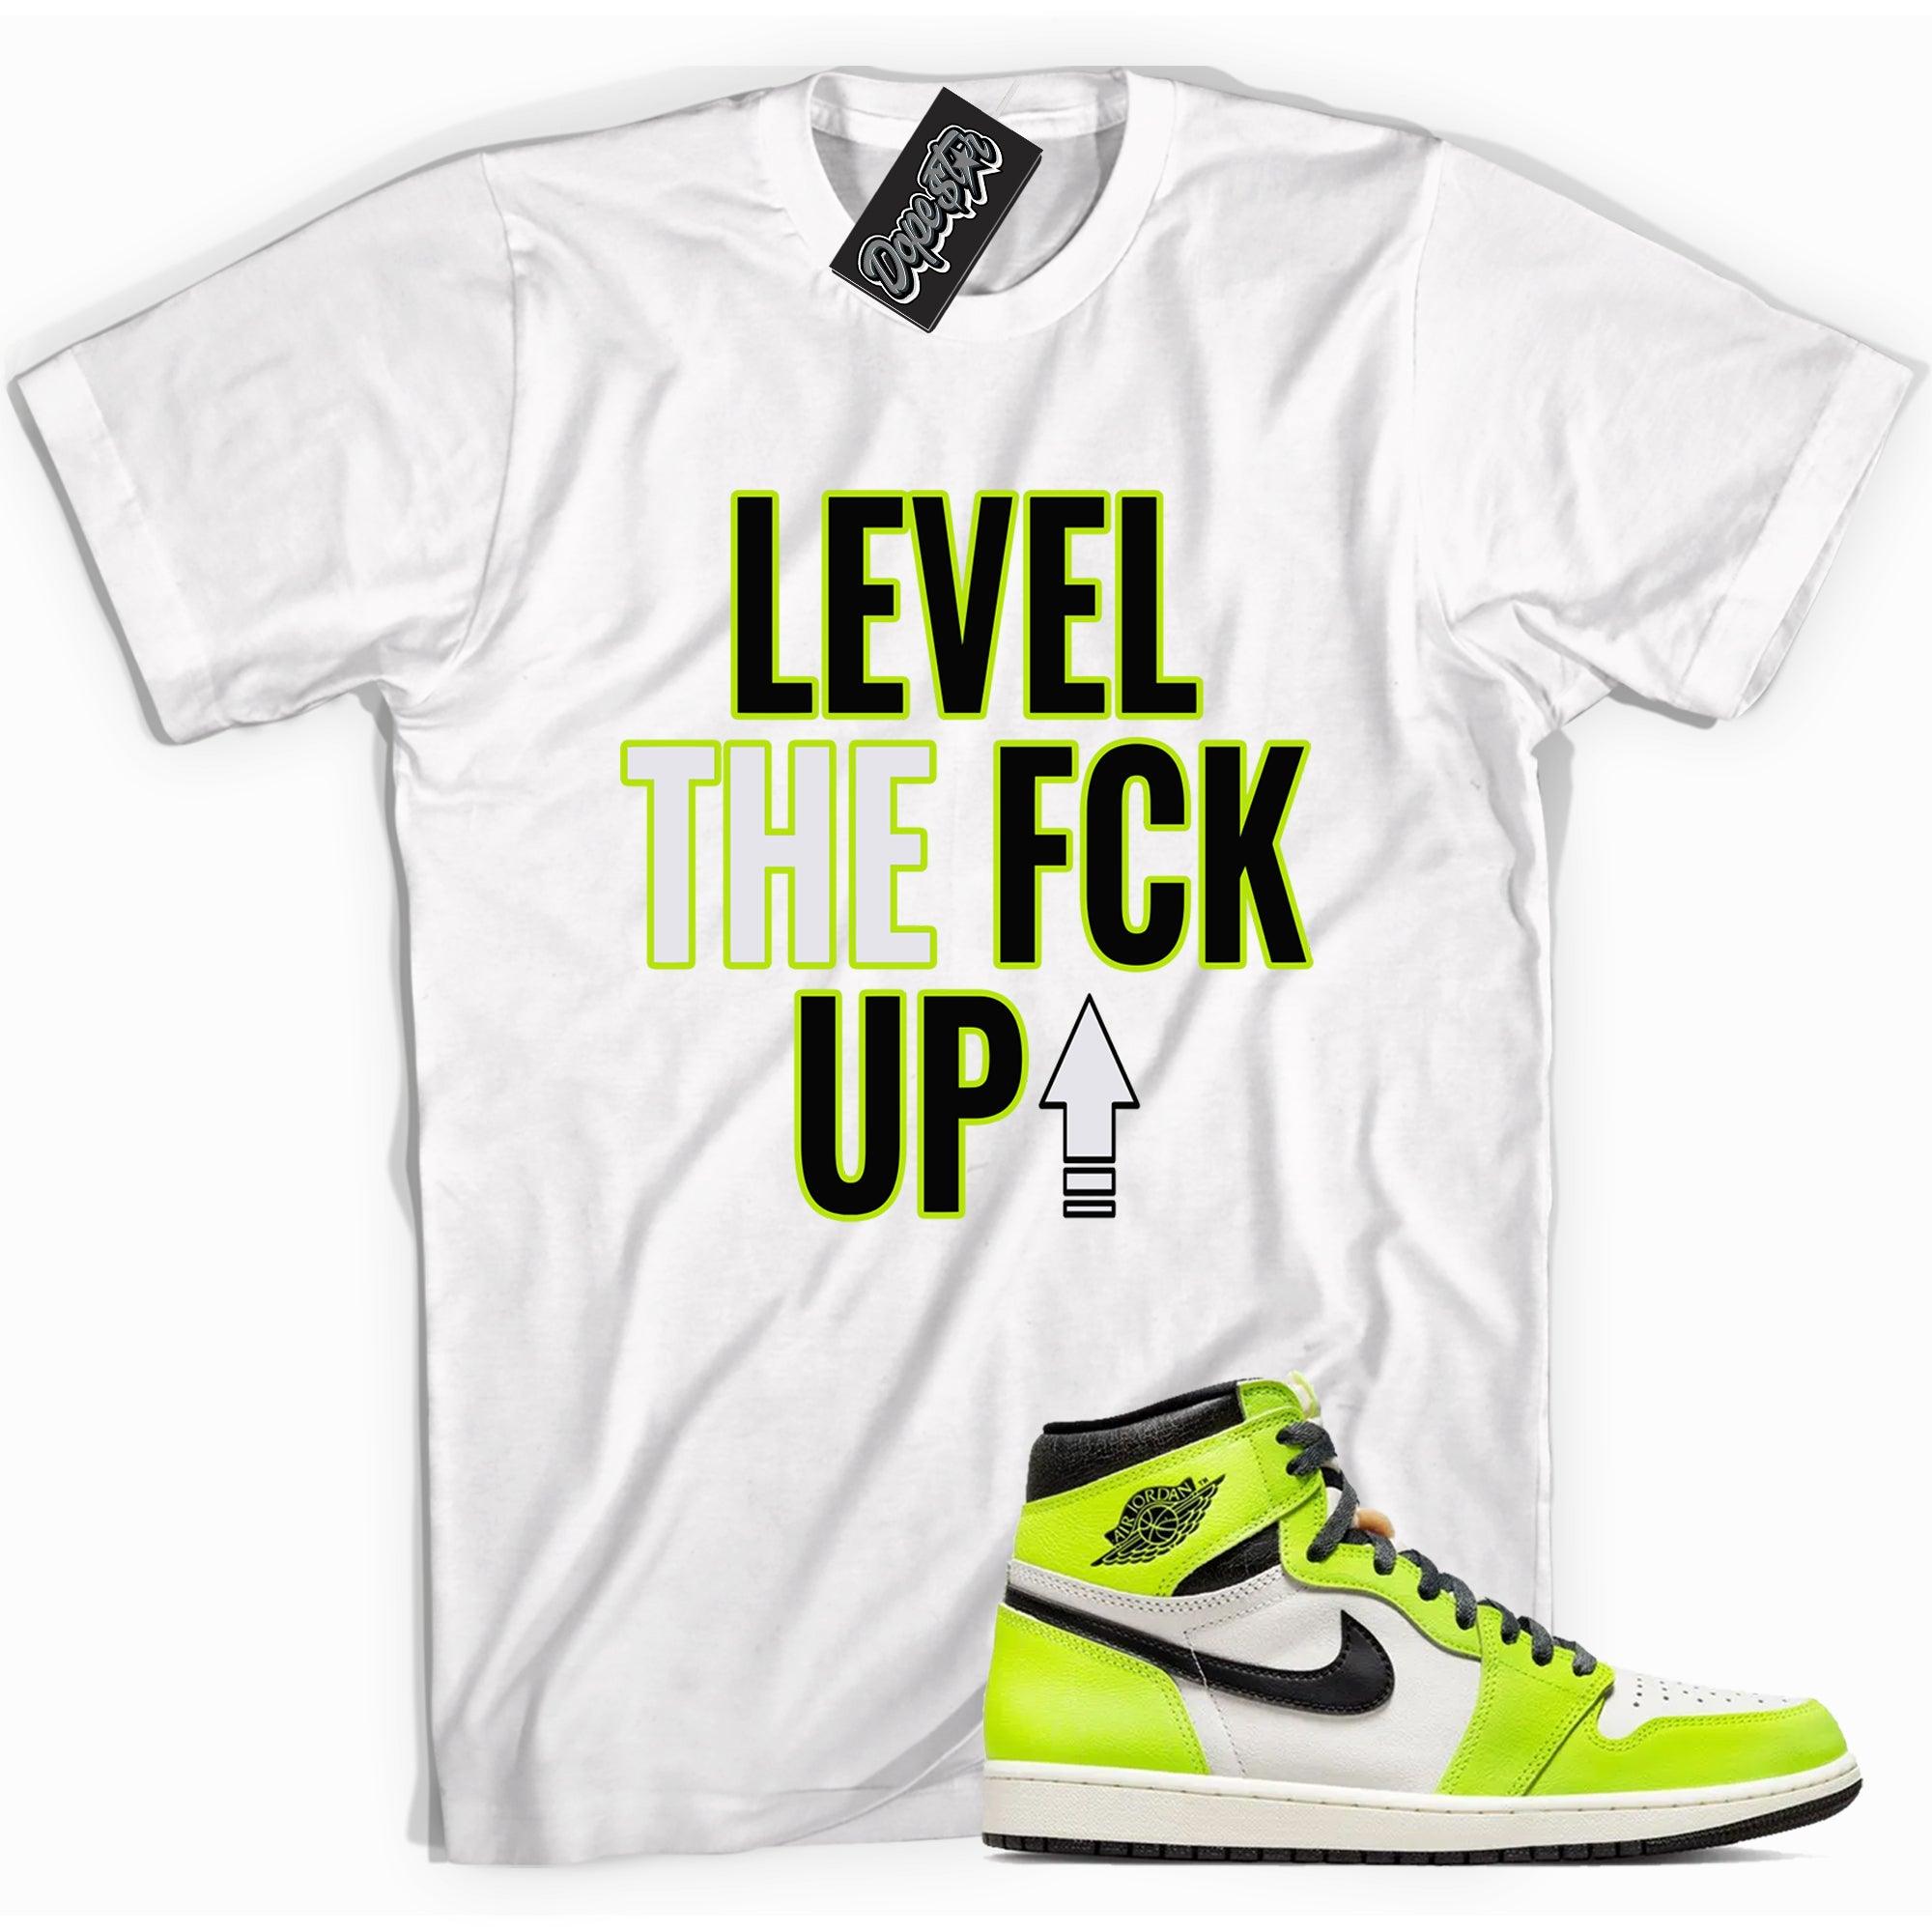 Cool white graphic tee with 'Level Up' print, that perfectly matches Air Jordan 1 high OG Visionaire sneakers.